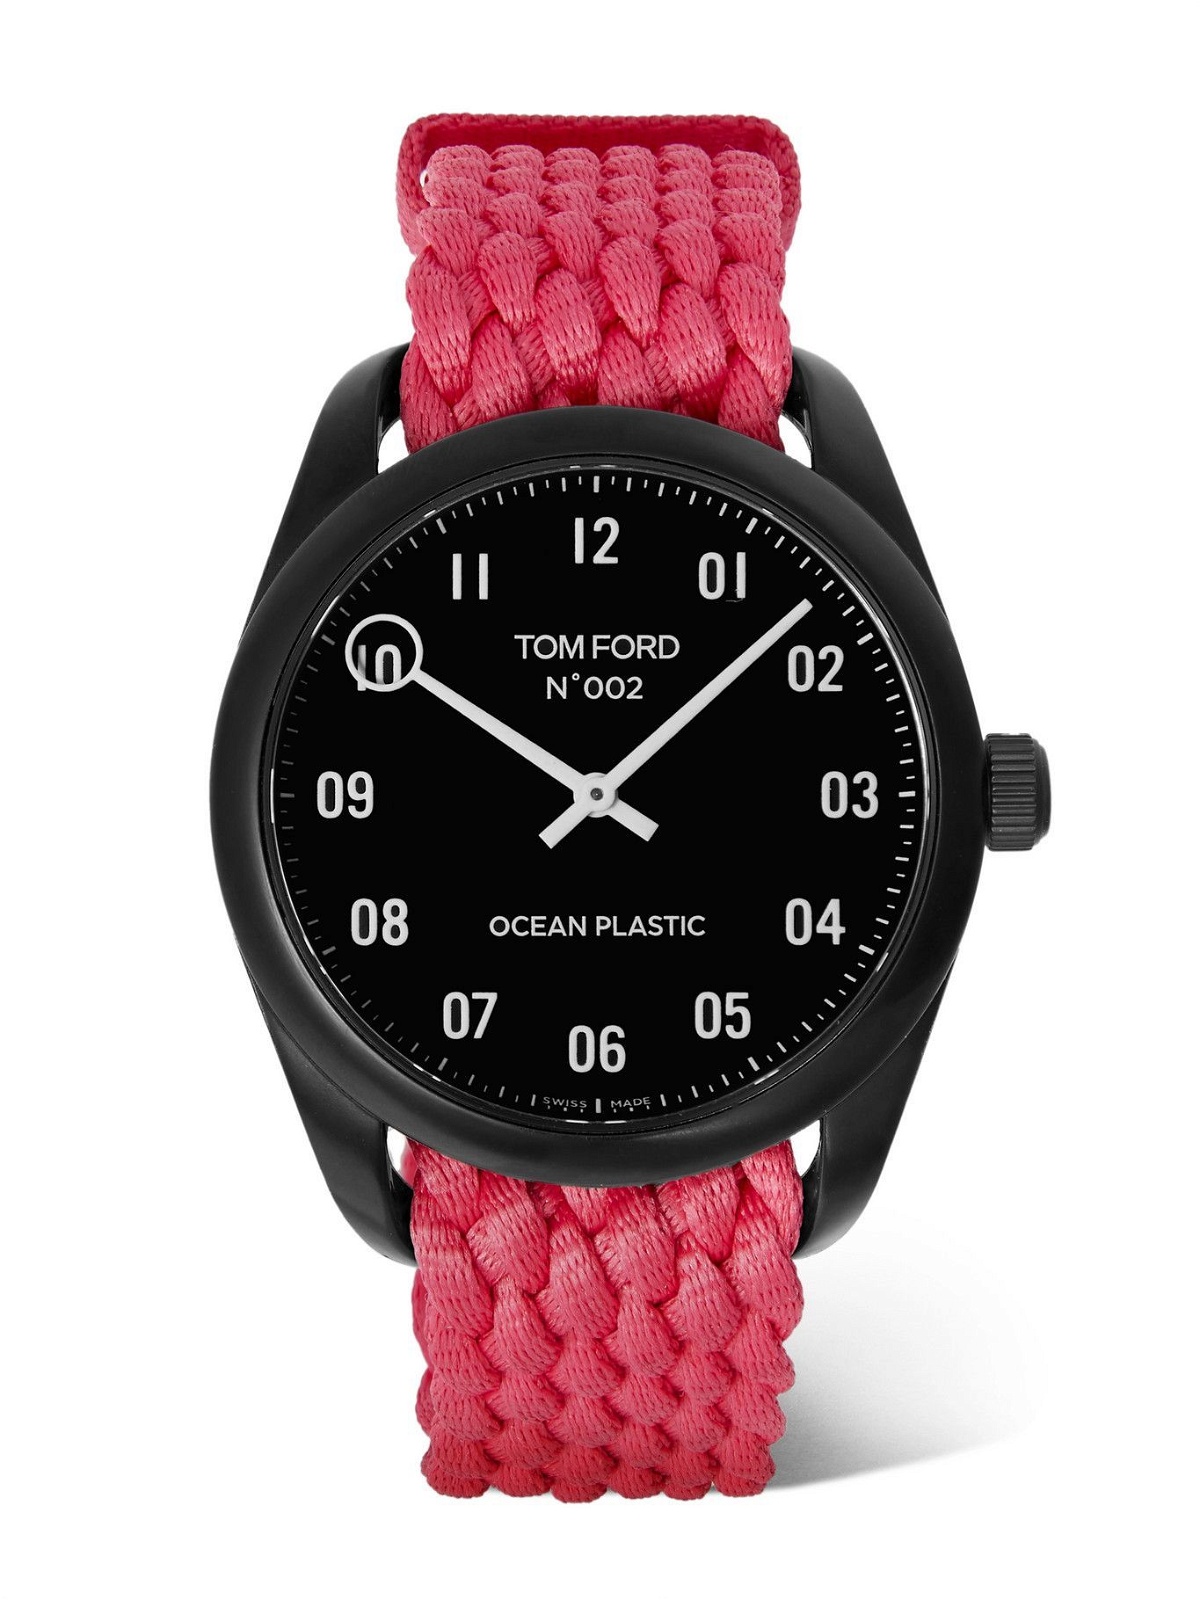 Photo: TOM FORD TIMEPIECES - 002 40mm Ocean Plastic Watch